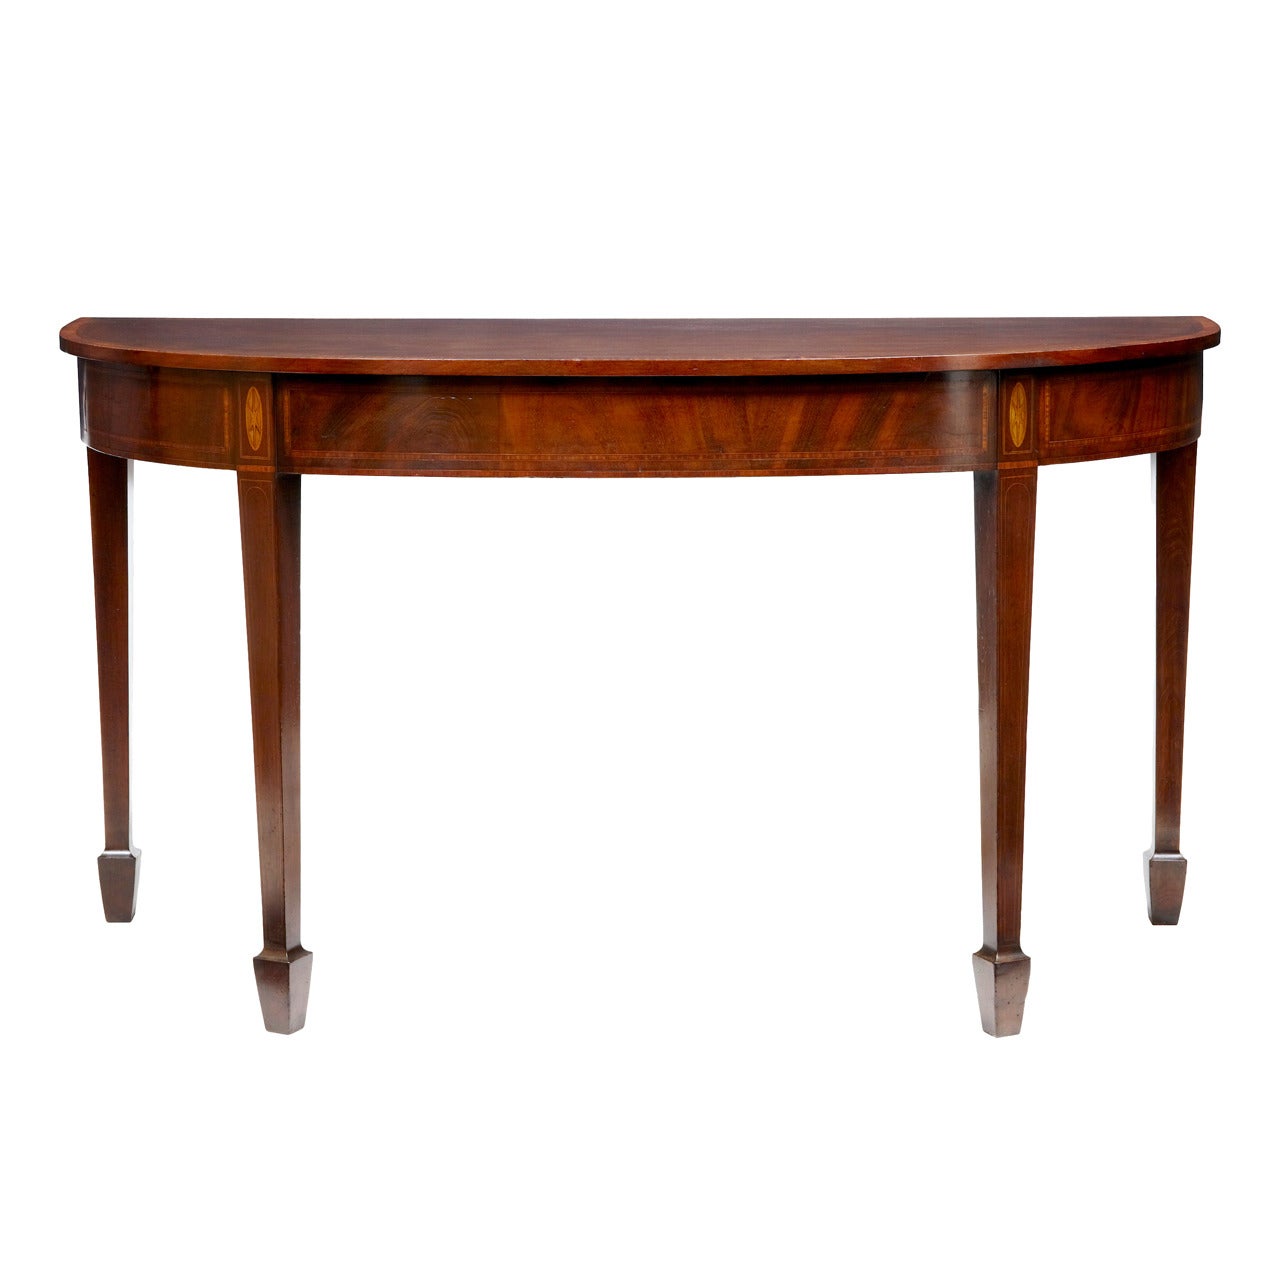 Late 19th Century Demi Lune Mahogany Serving Table